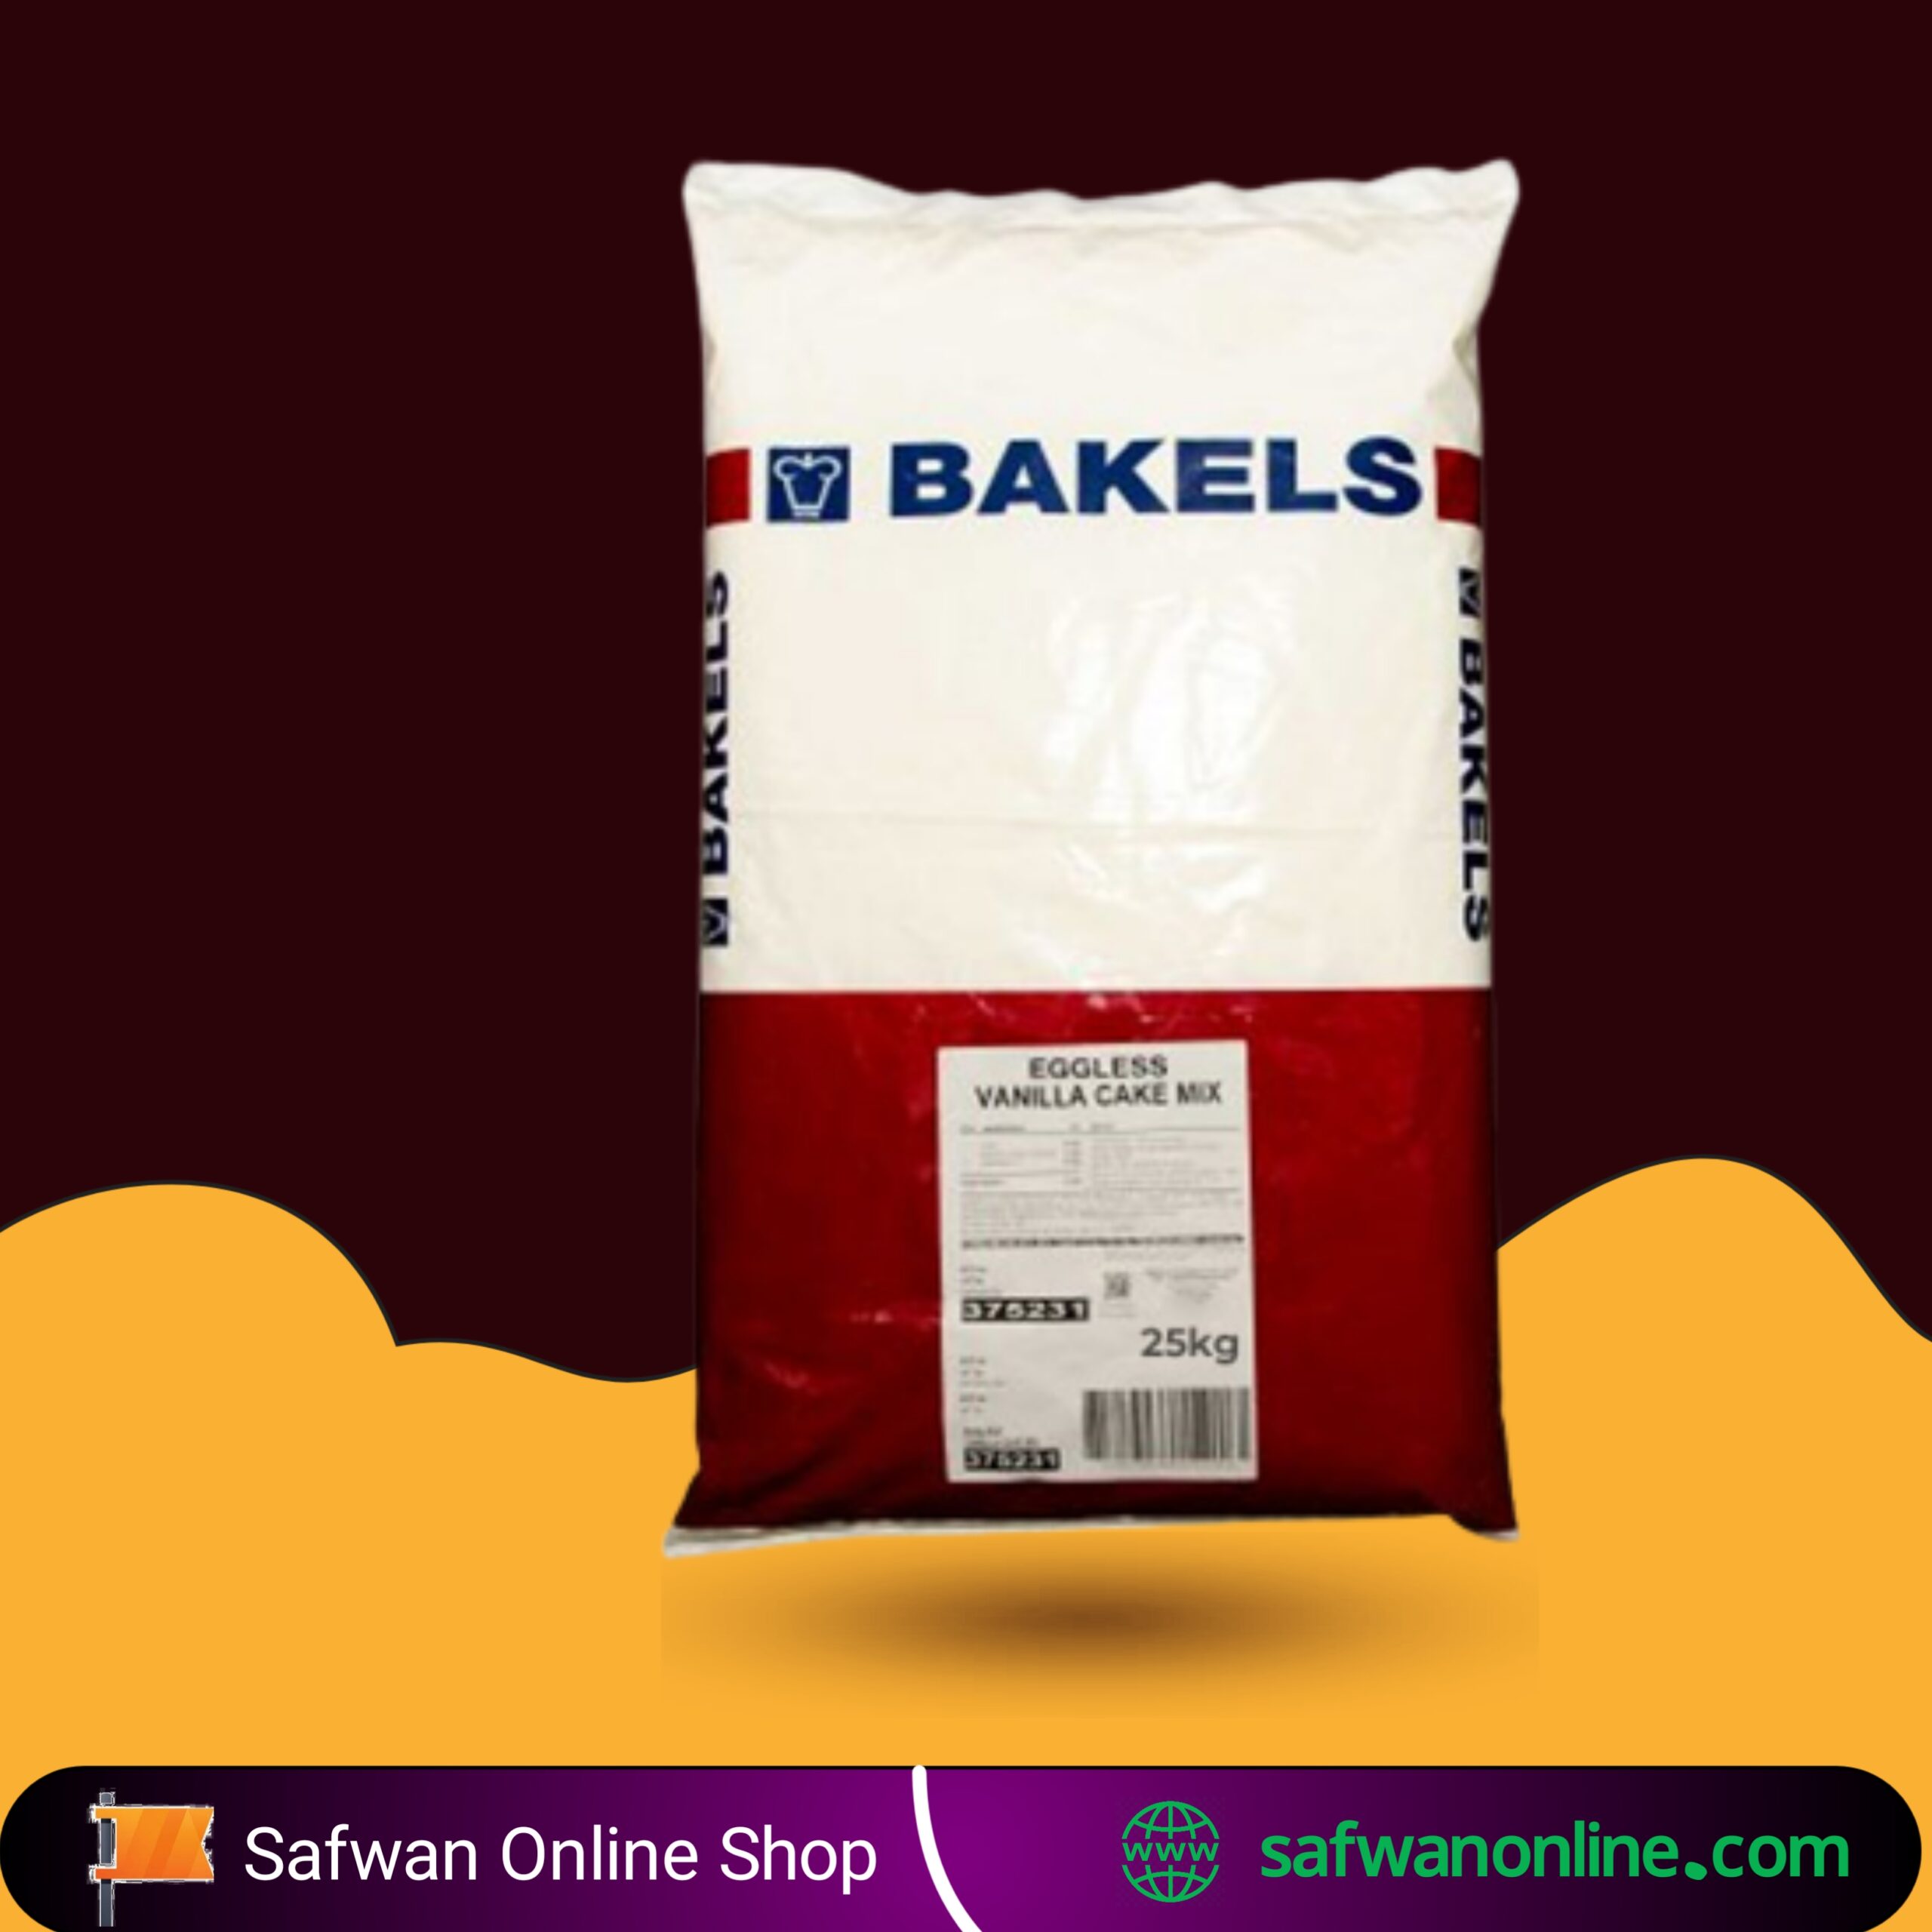 Discover more than 78 bakels cake mix latest - awesomeenglish.edu.vn